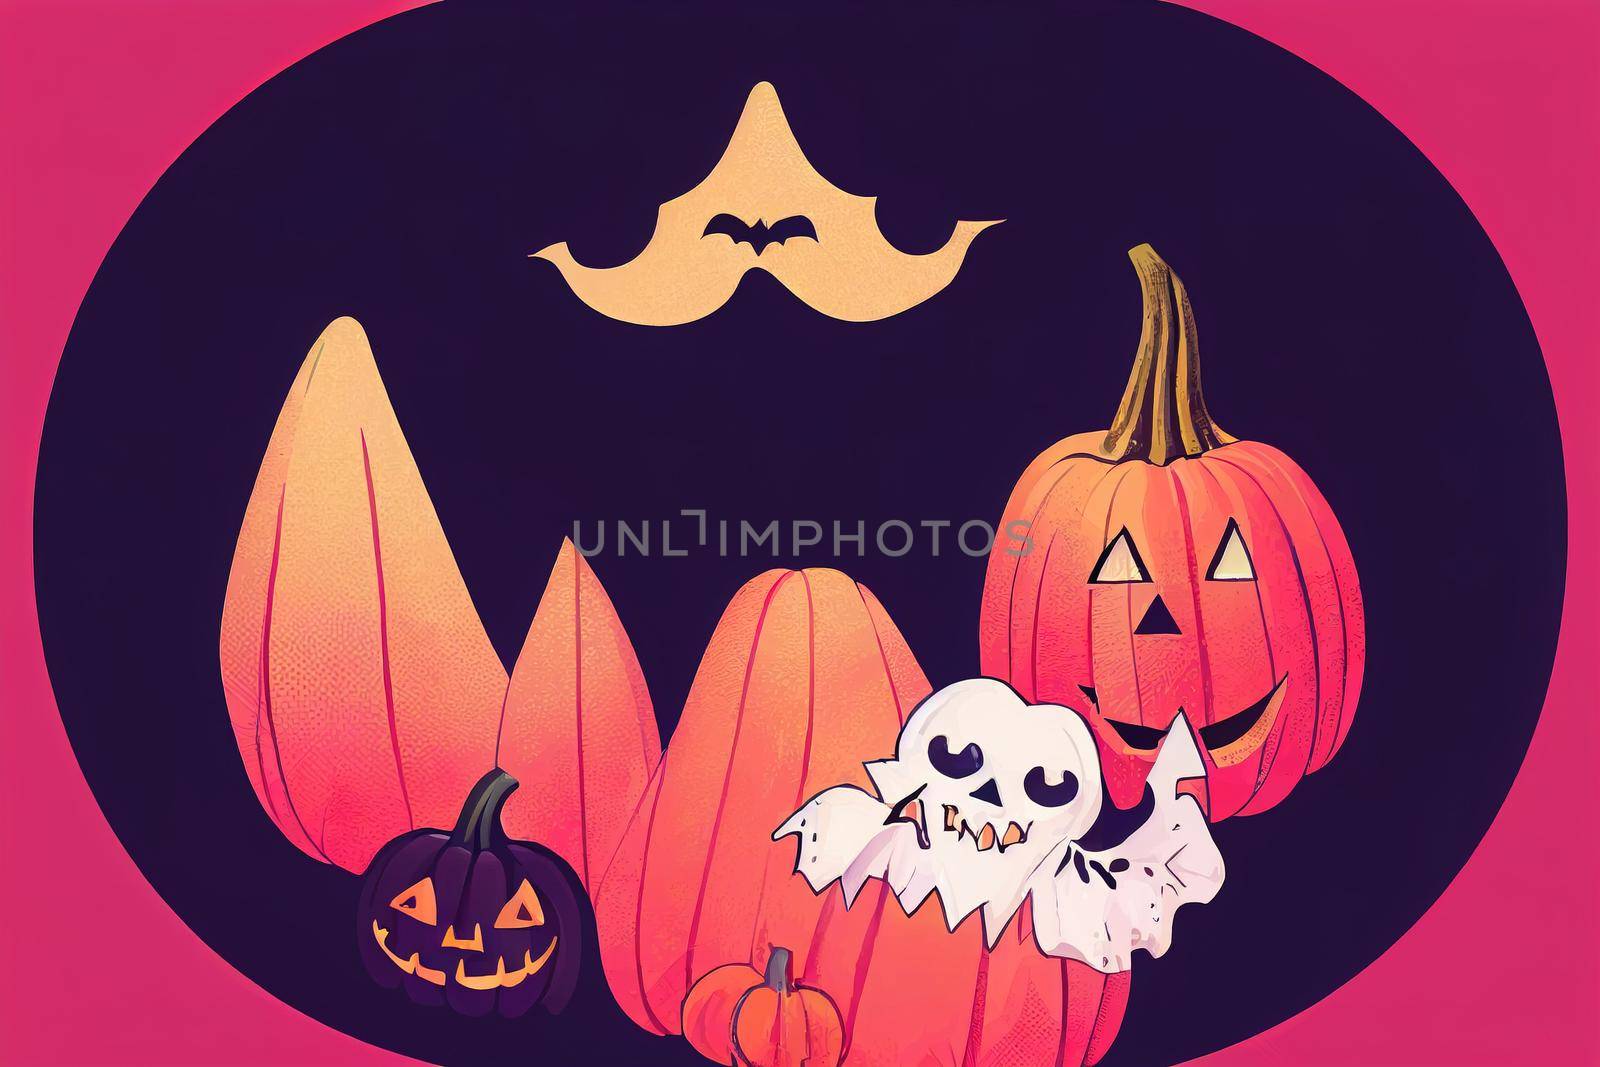 Cute Halloween Illustration with Pumpkin Surrounded by Ghosts and Bats, Isolated on Pink Background, Hand Drawn Simple Design, Ideal for Posters, Cards, Wall Art or Clothes, painting v3